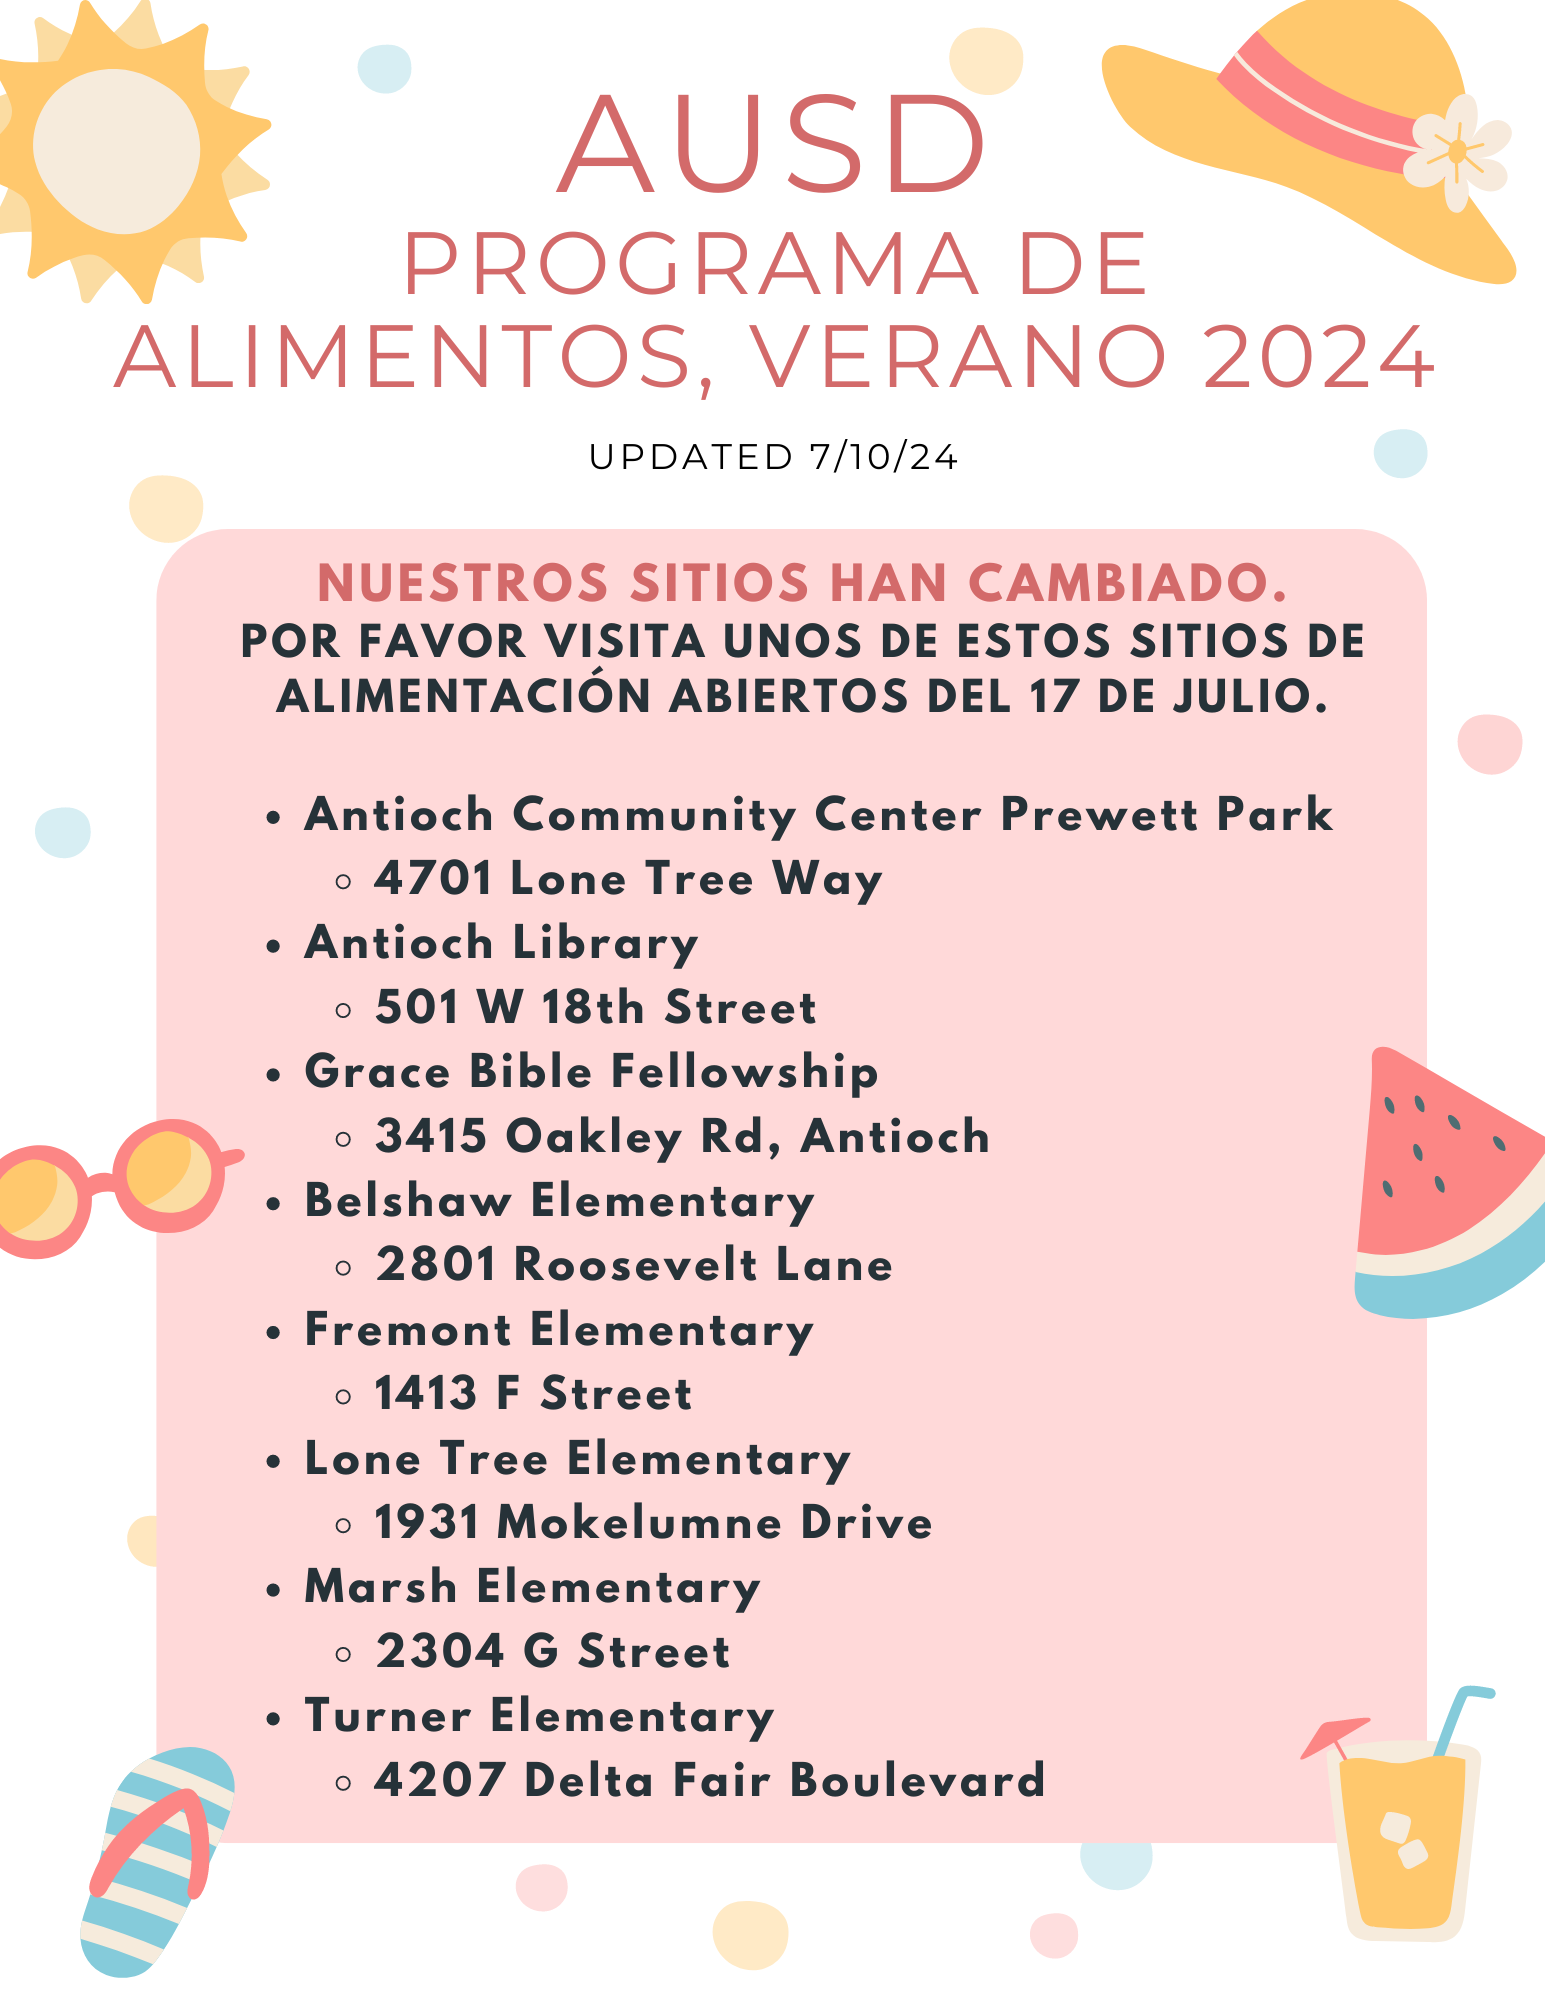 In Spanish, list of remaining open summer feeding sites starting on July 17th.